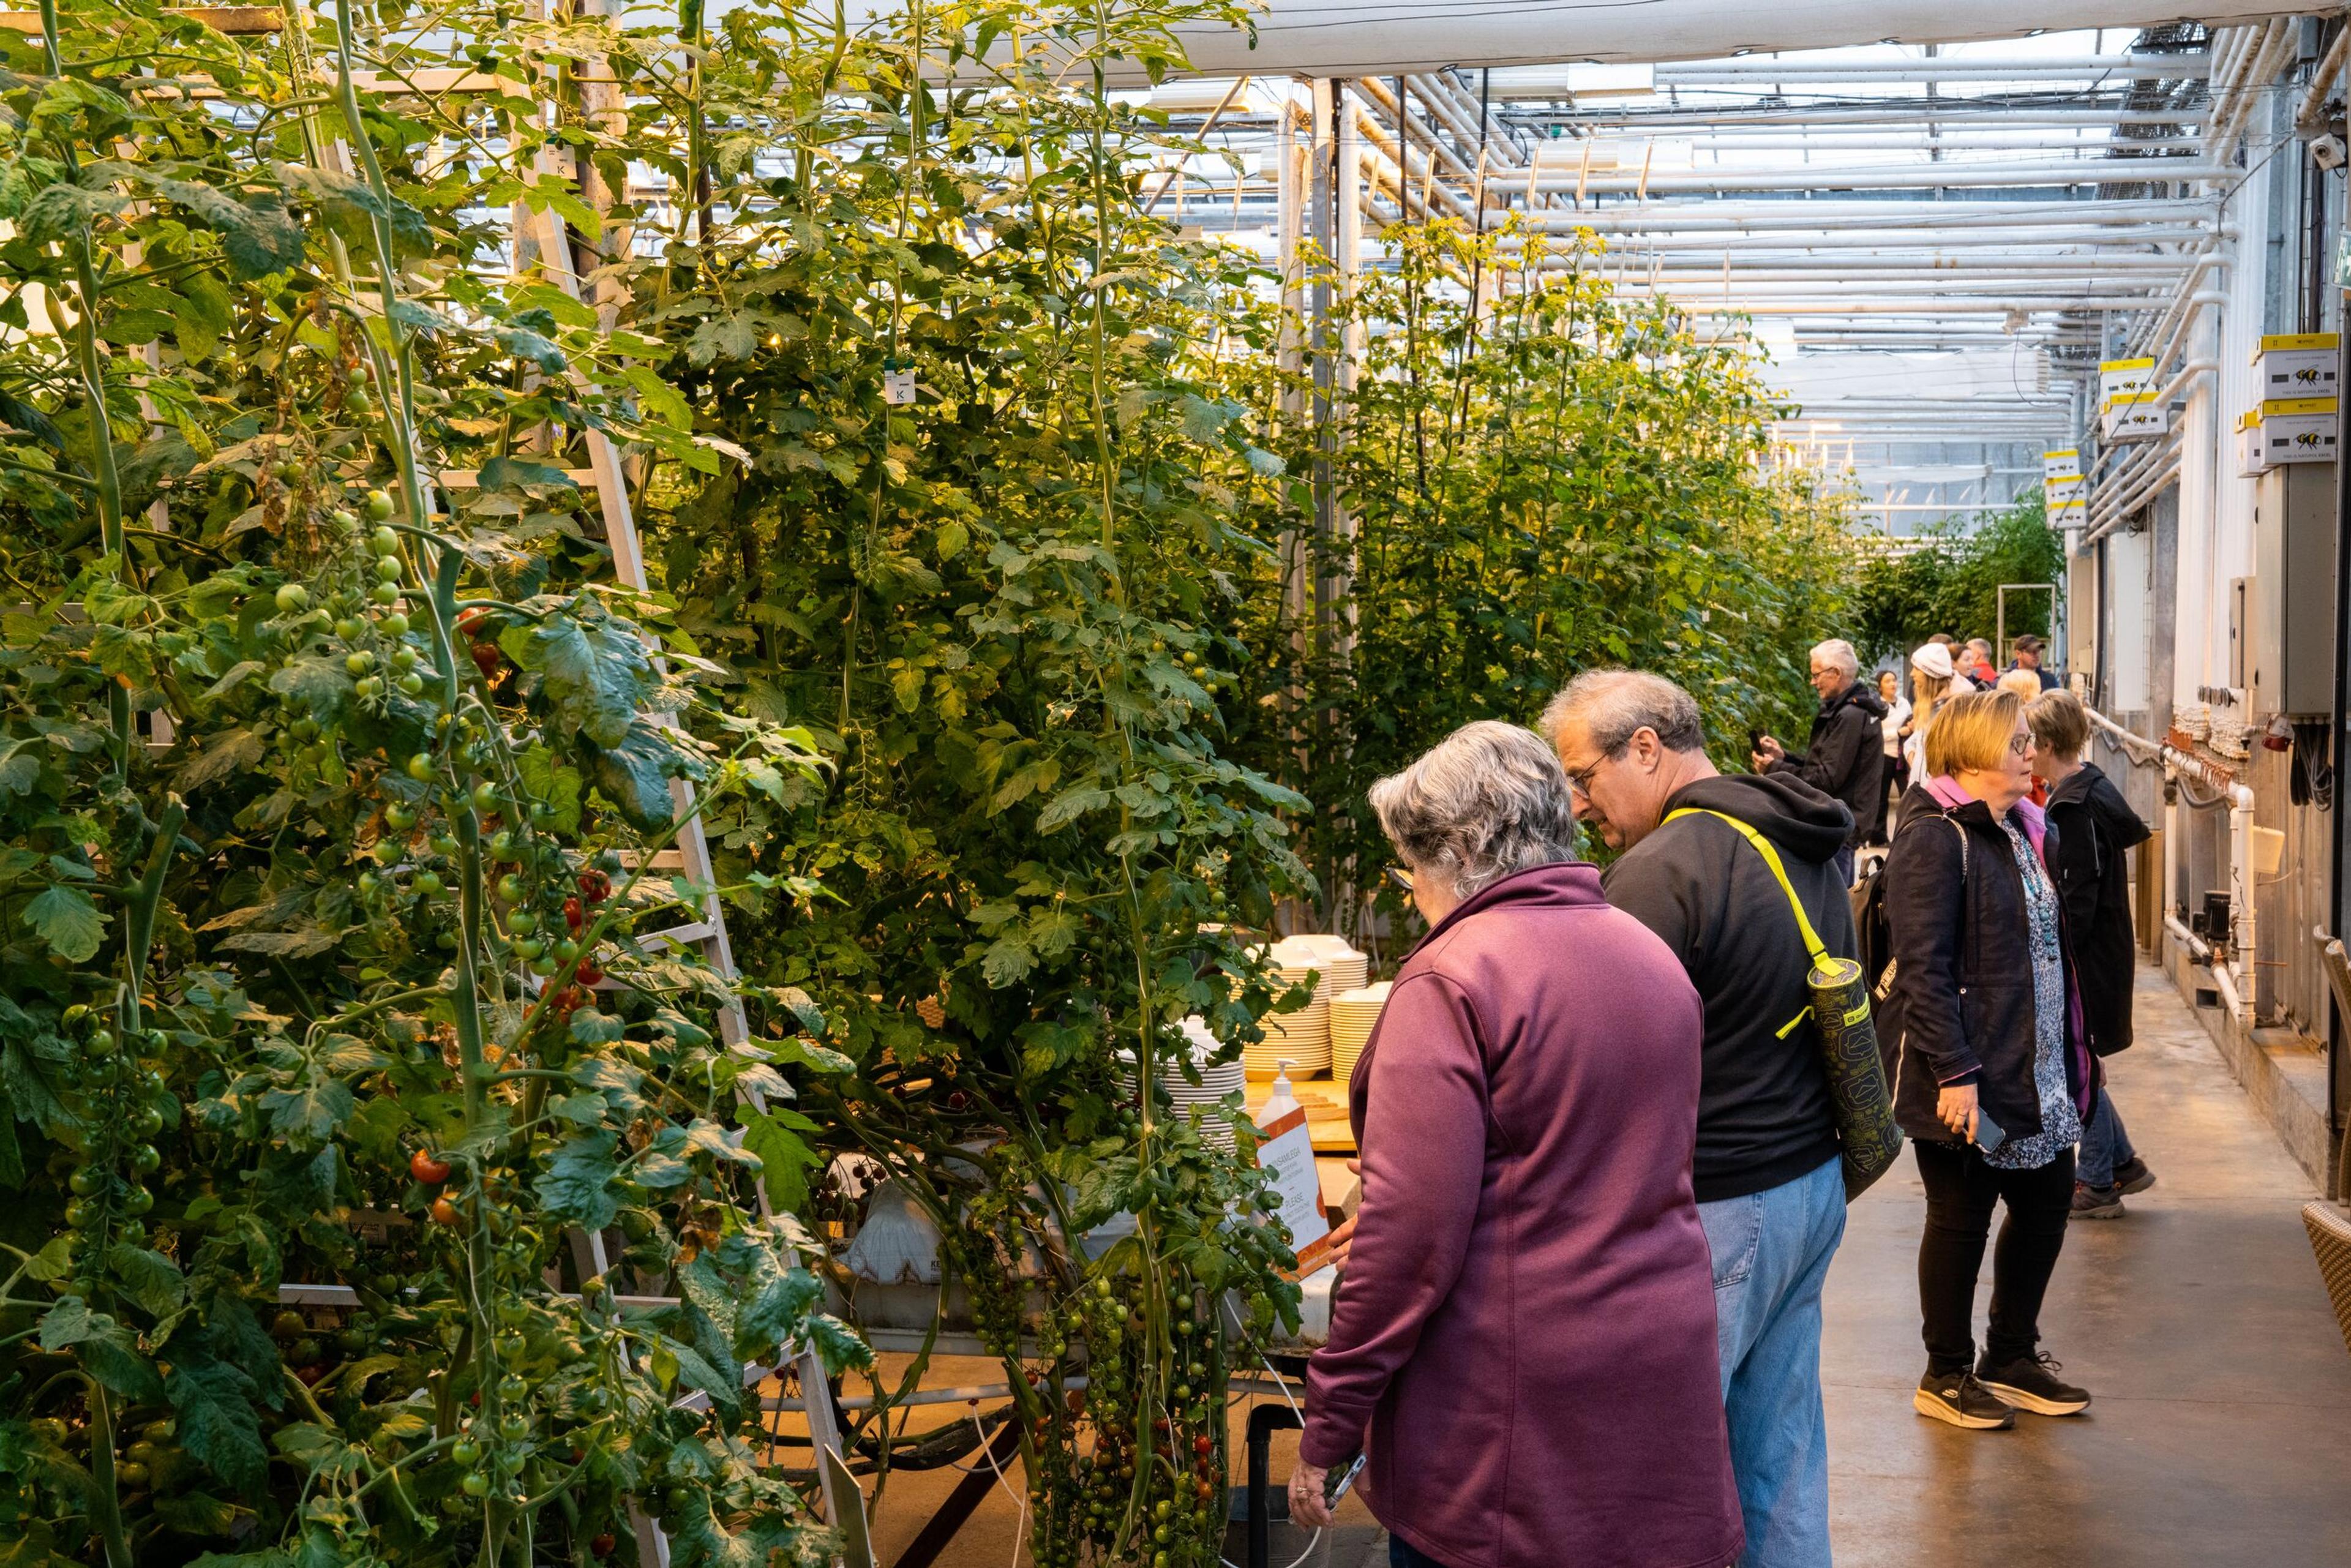 Tourists admiring Icelandic grown tomatoes at Fridheimar greenhous in Iceland.